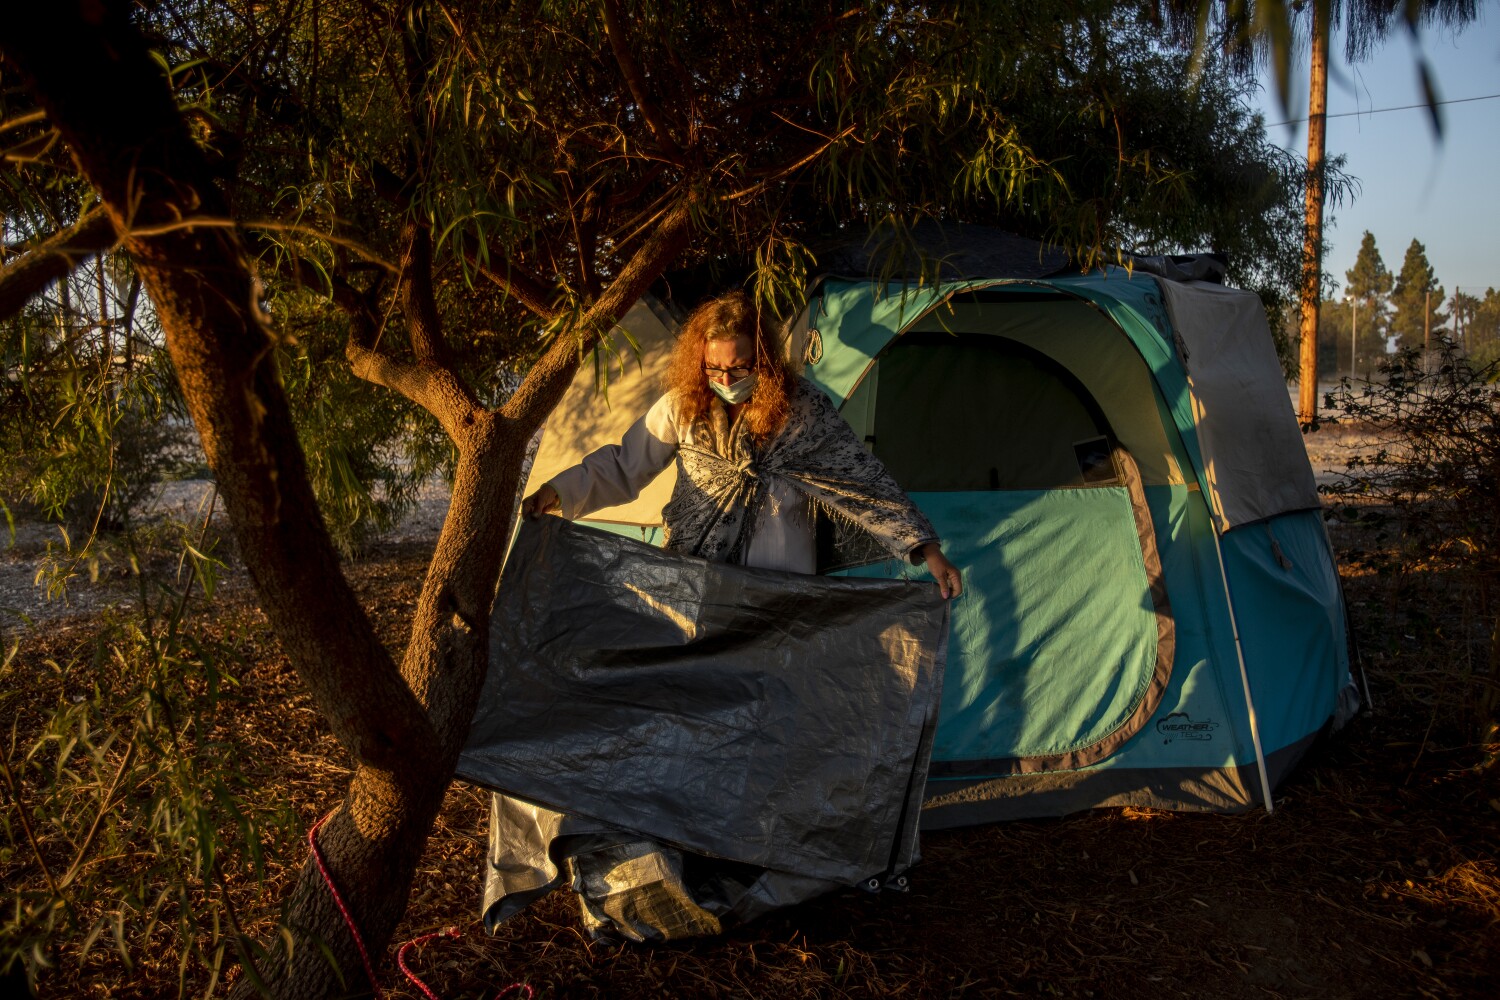 Homeless Orange County woman fought to sleep in the park and won — for now